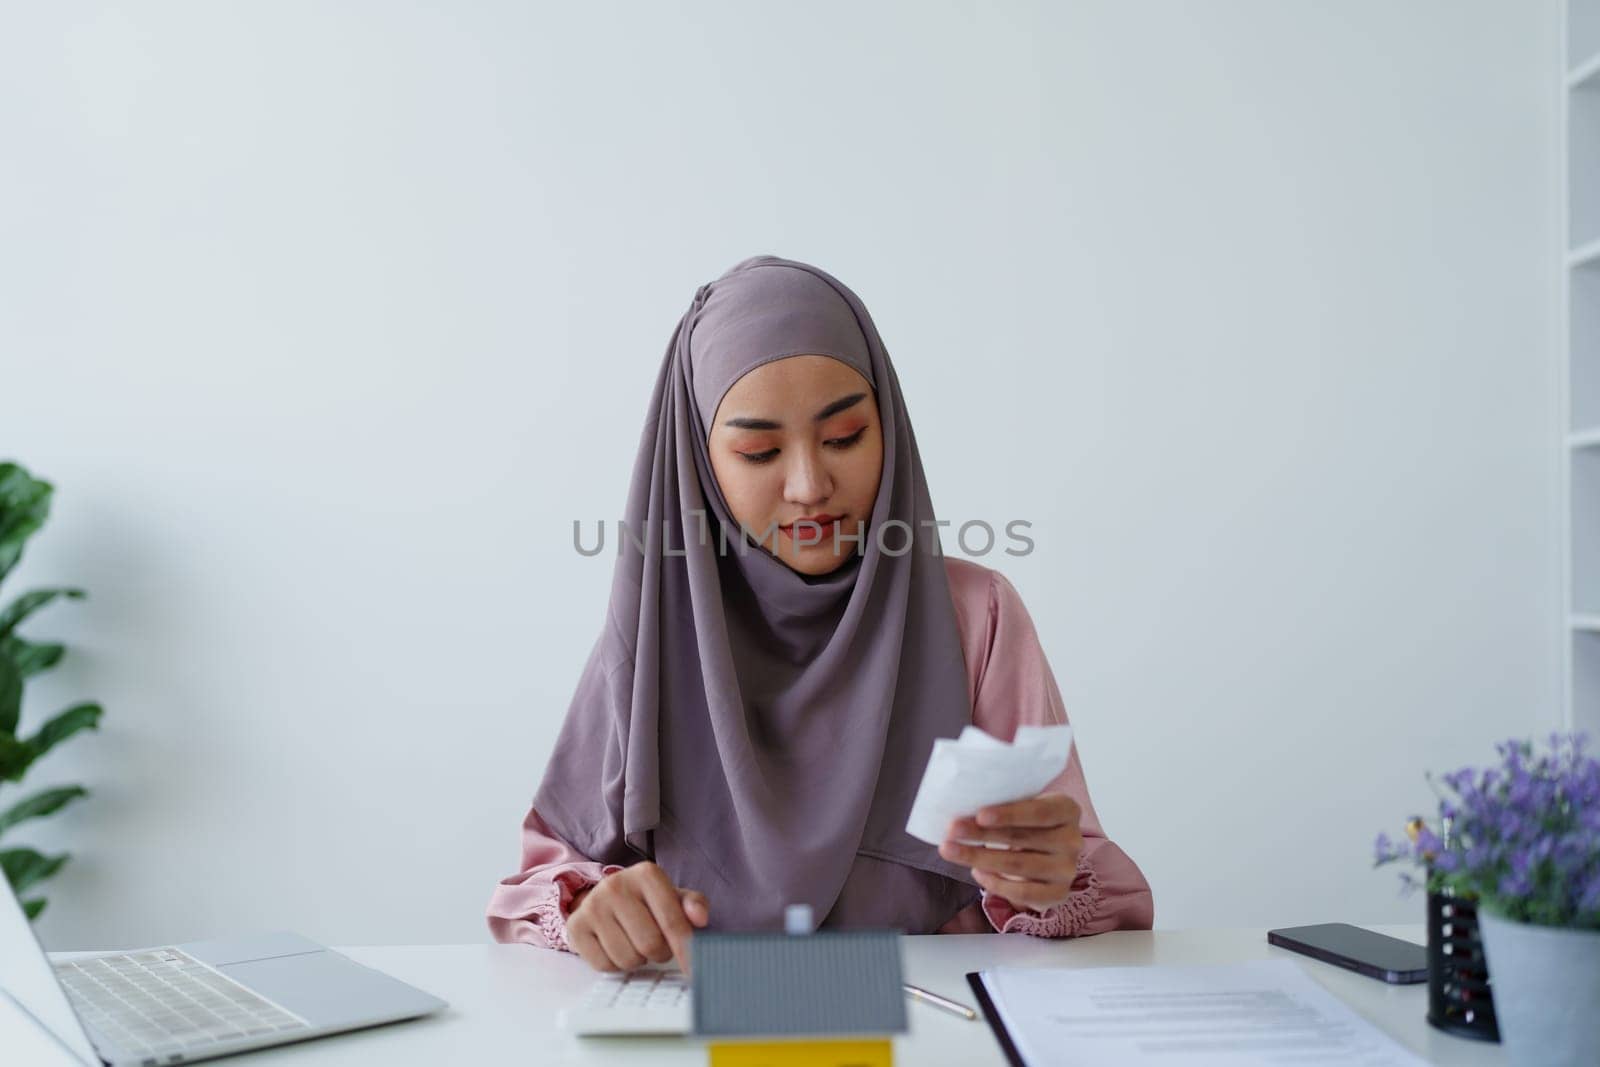 muslim woman with hijab using calculator focus on utility bills calculate check credit card receipt monthly expense. by Manastrong